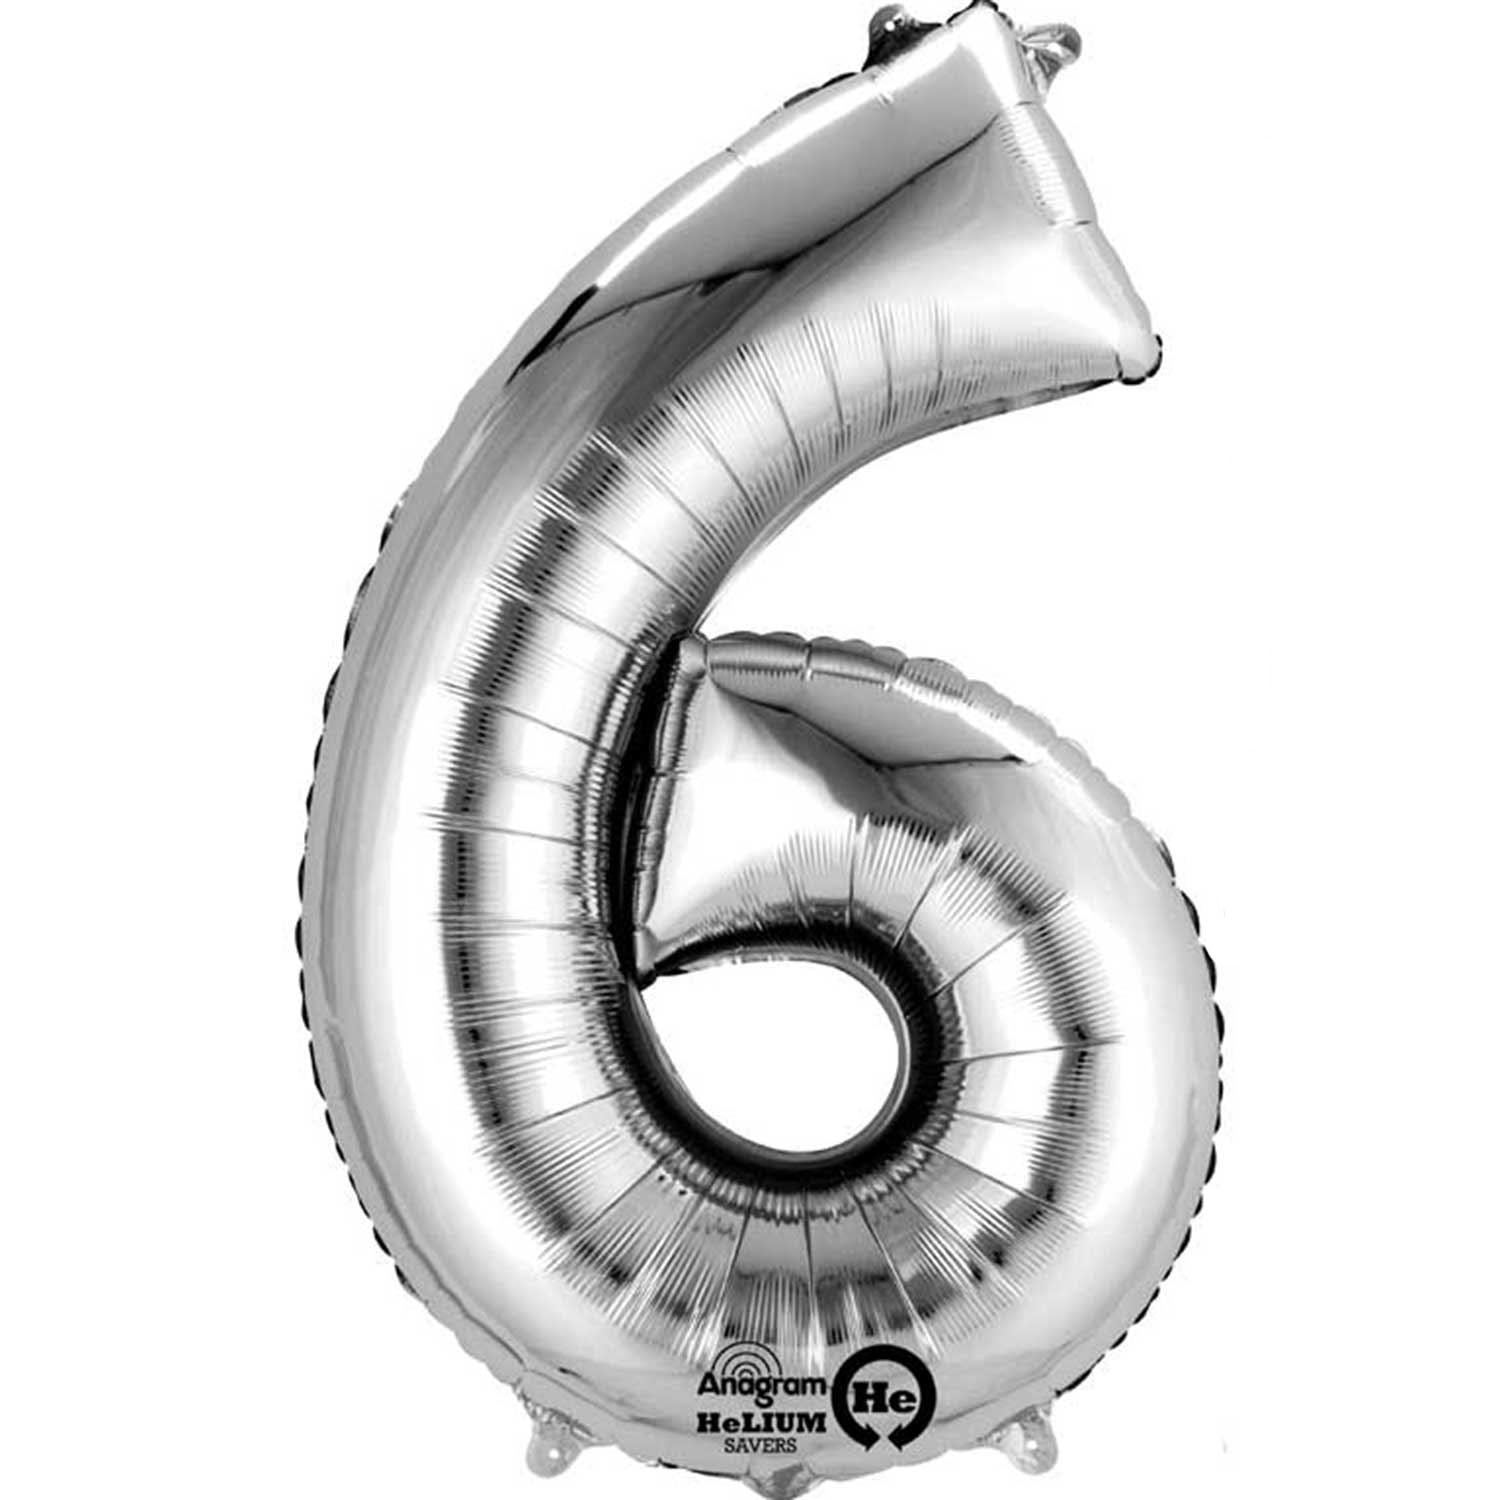 40cm (16in) Minishape Number 6 Silver Foil Balloon Air Fill, Includes straw for air inflation.